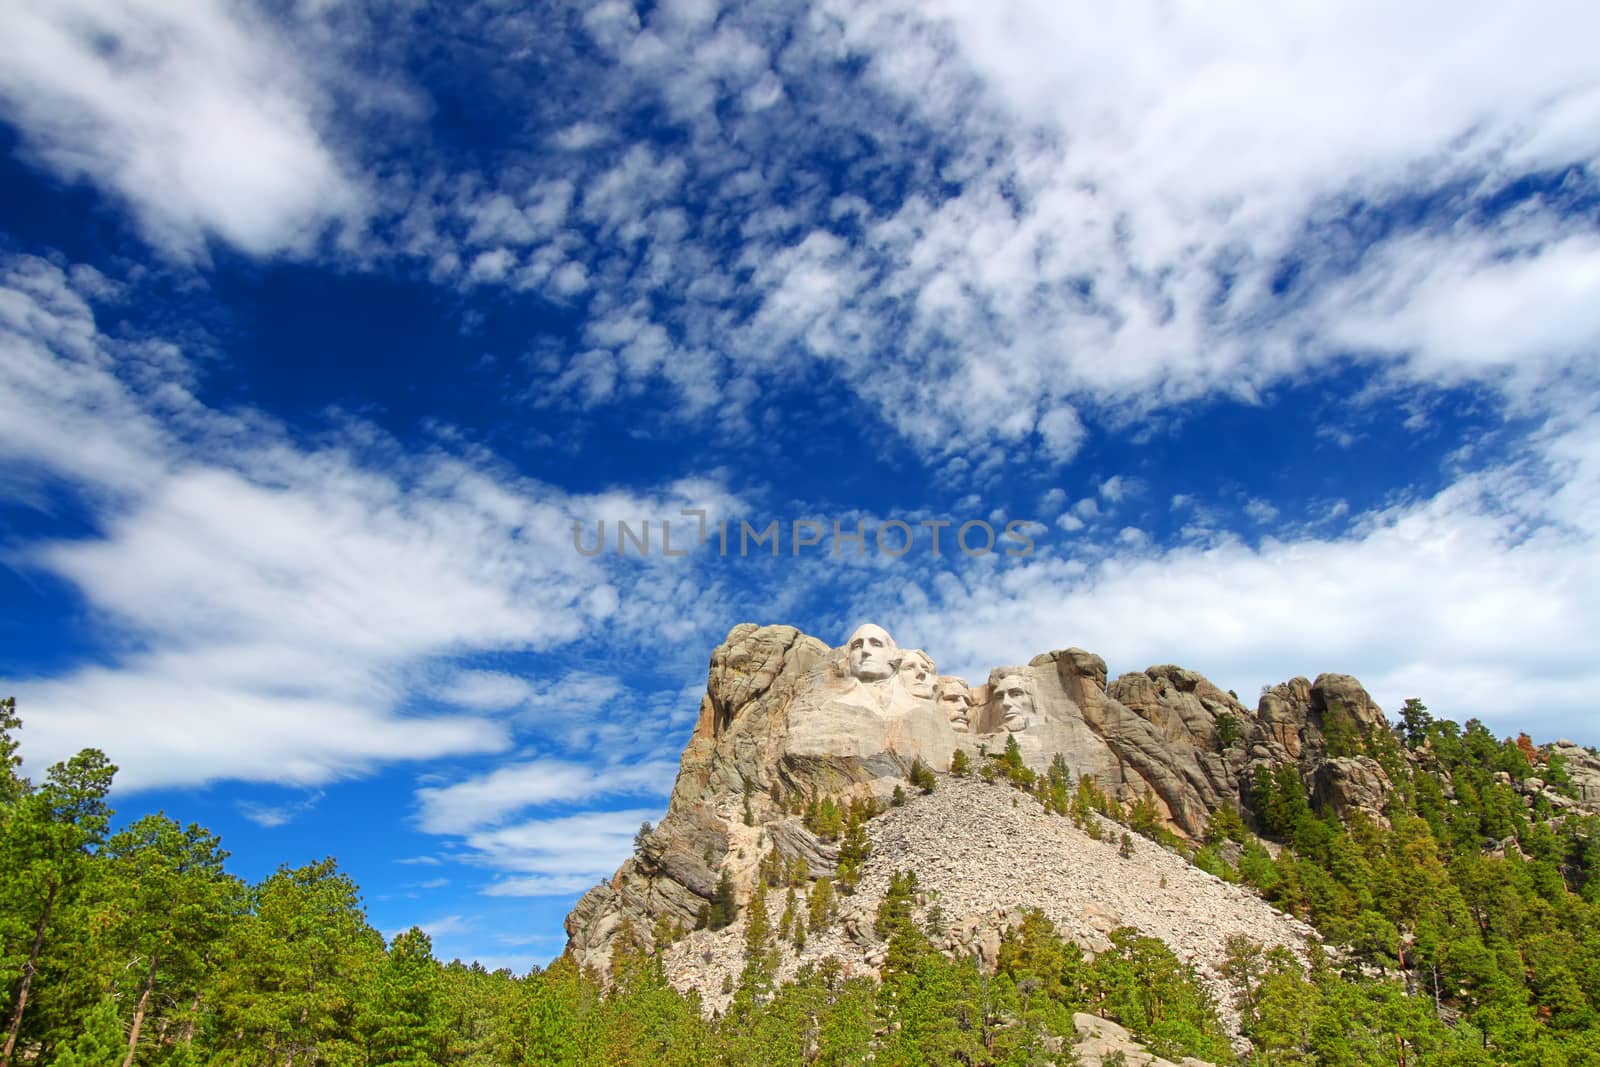 Mount Rushmore National Memorial carved into the peaks of the Black Hills in South Dakota.